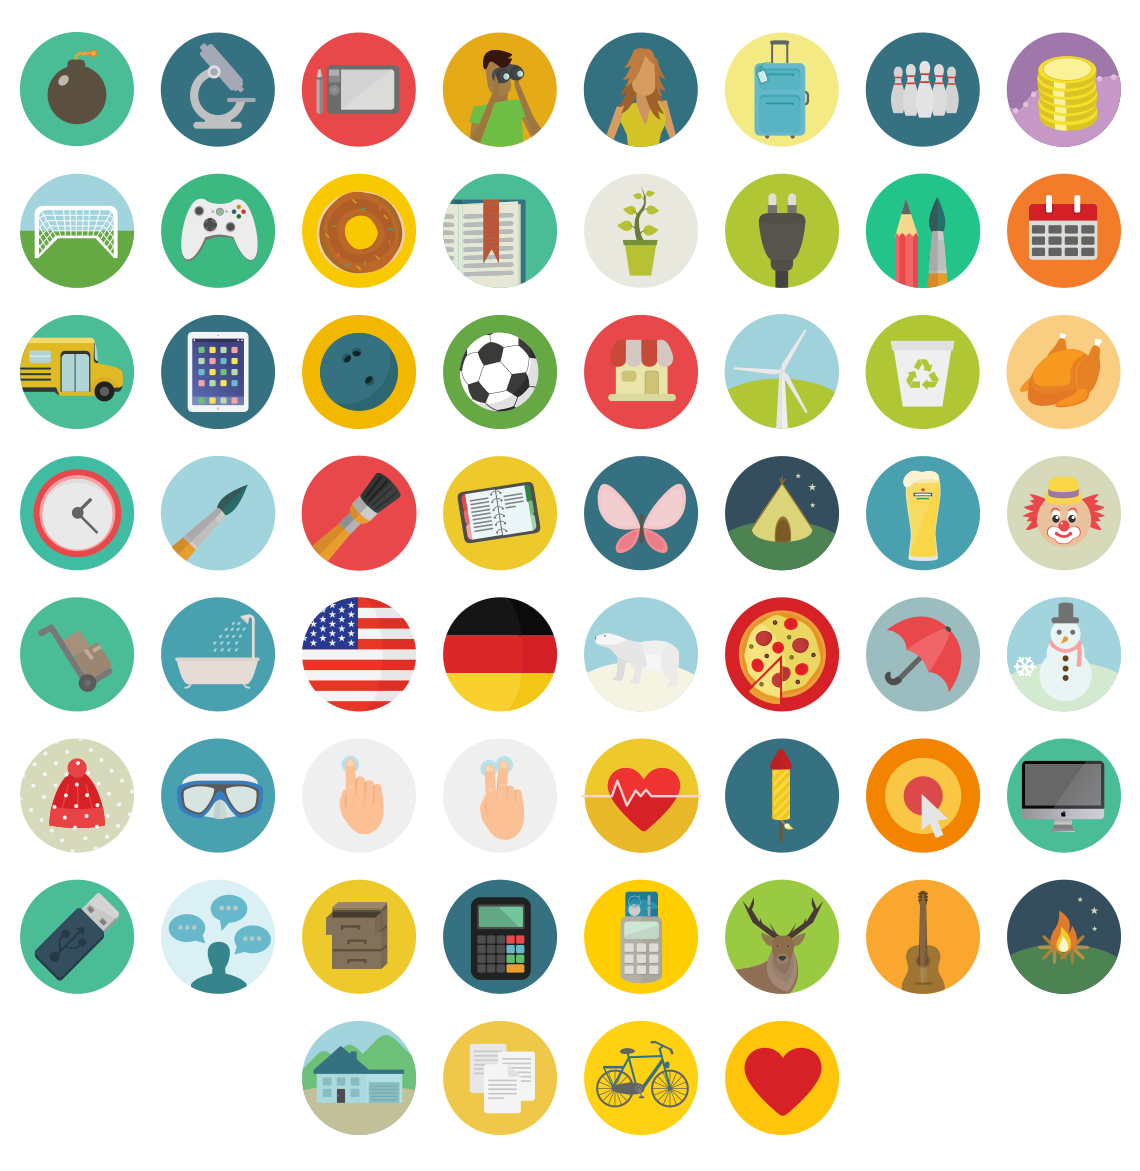 Large round icons pack Vector | Free Download